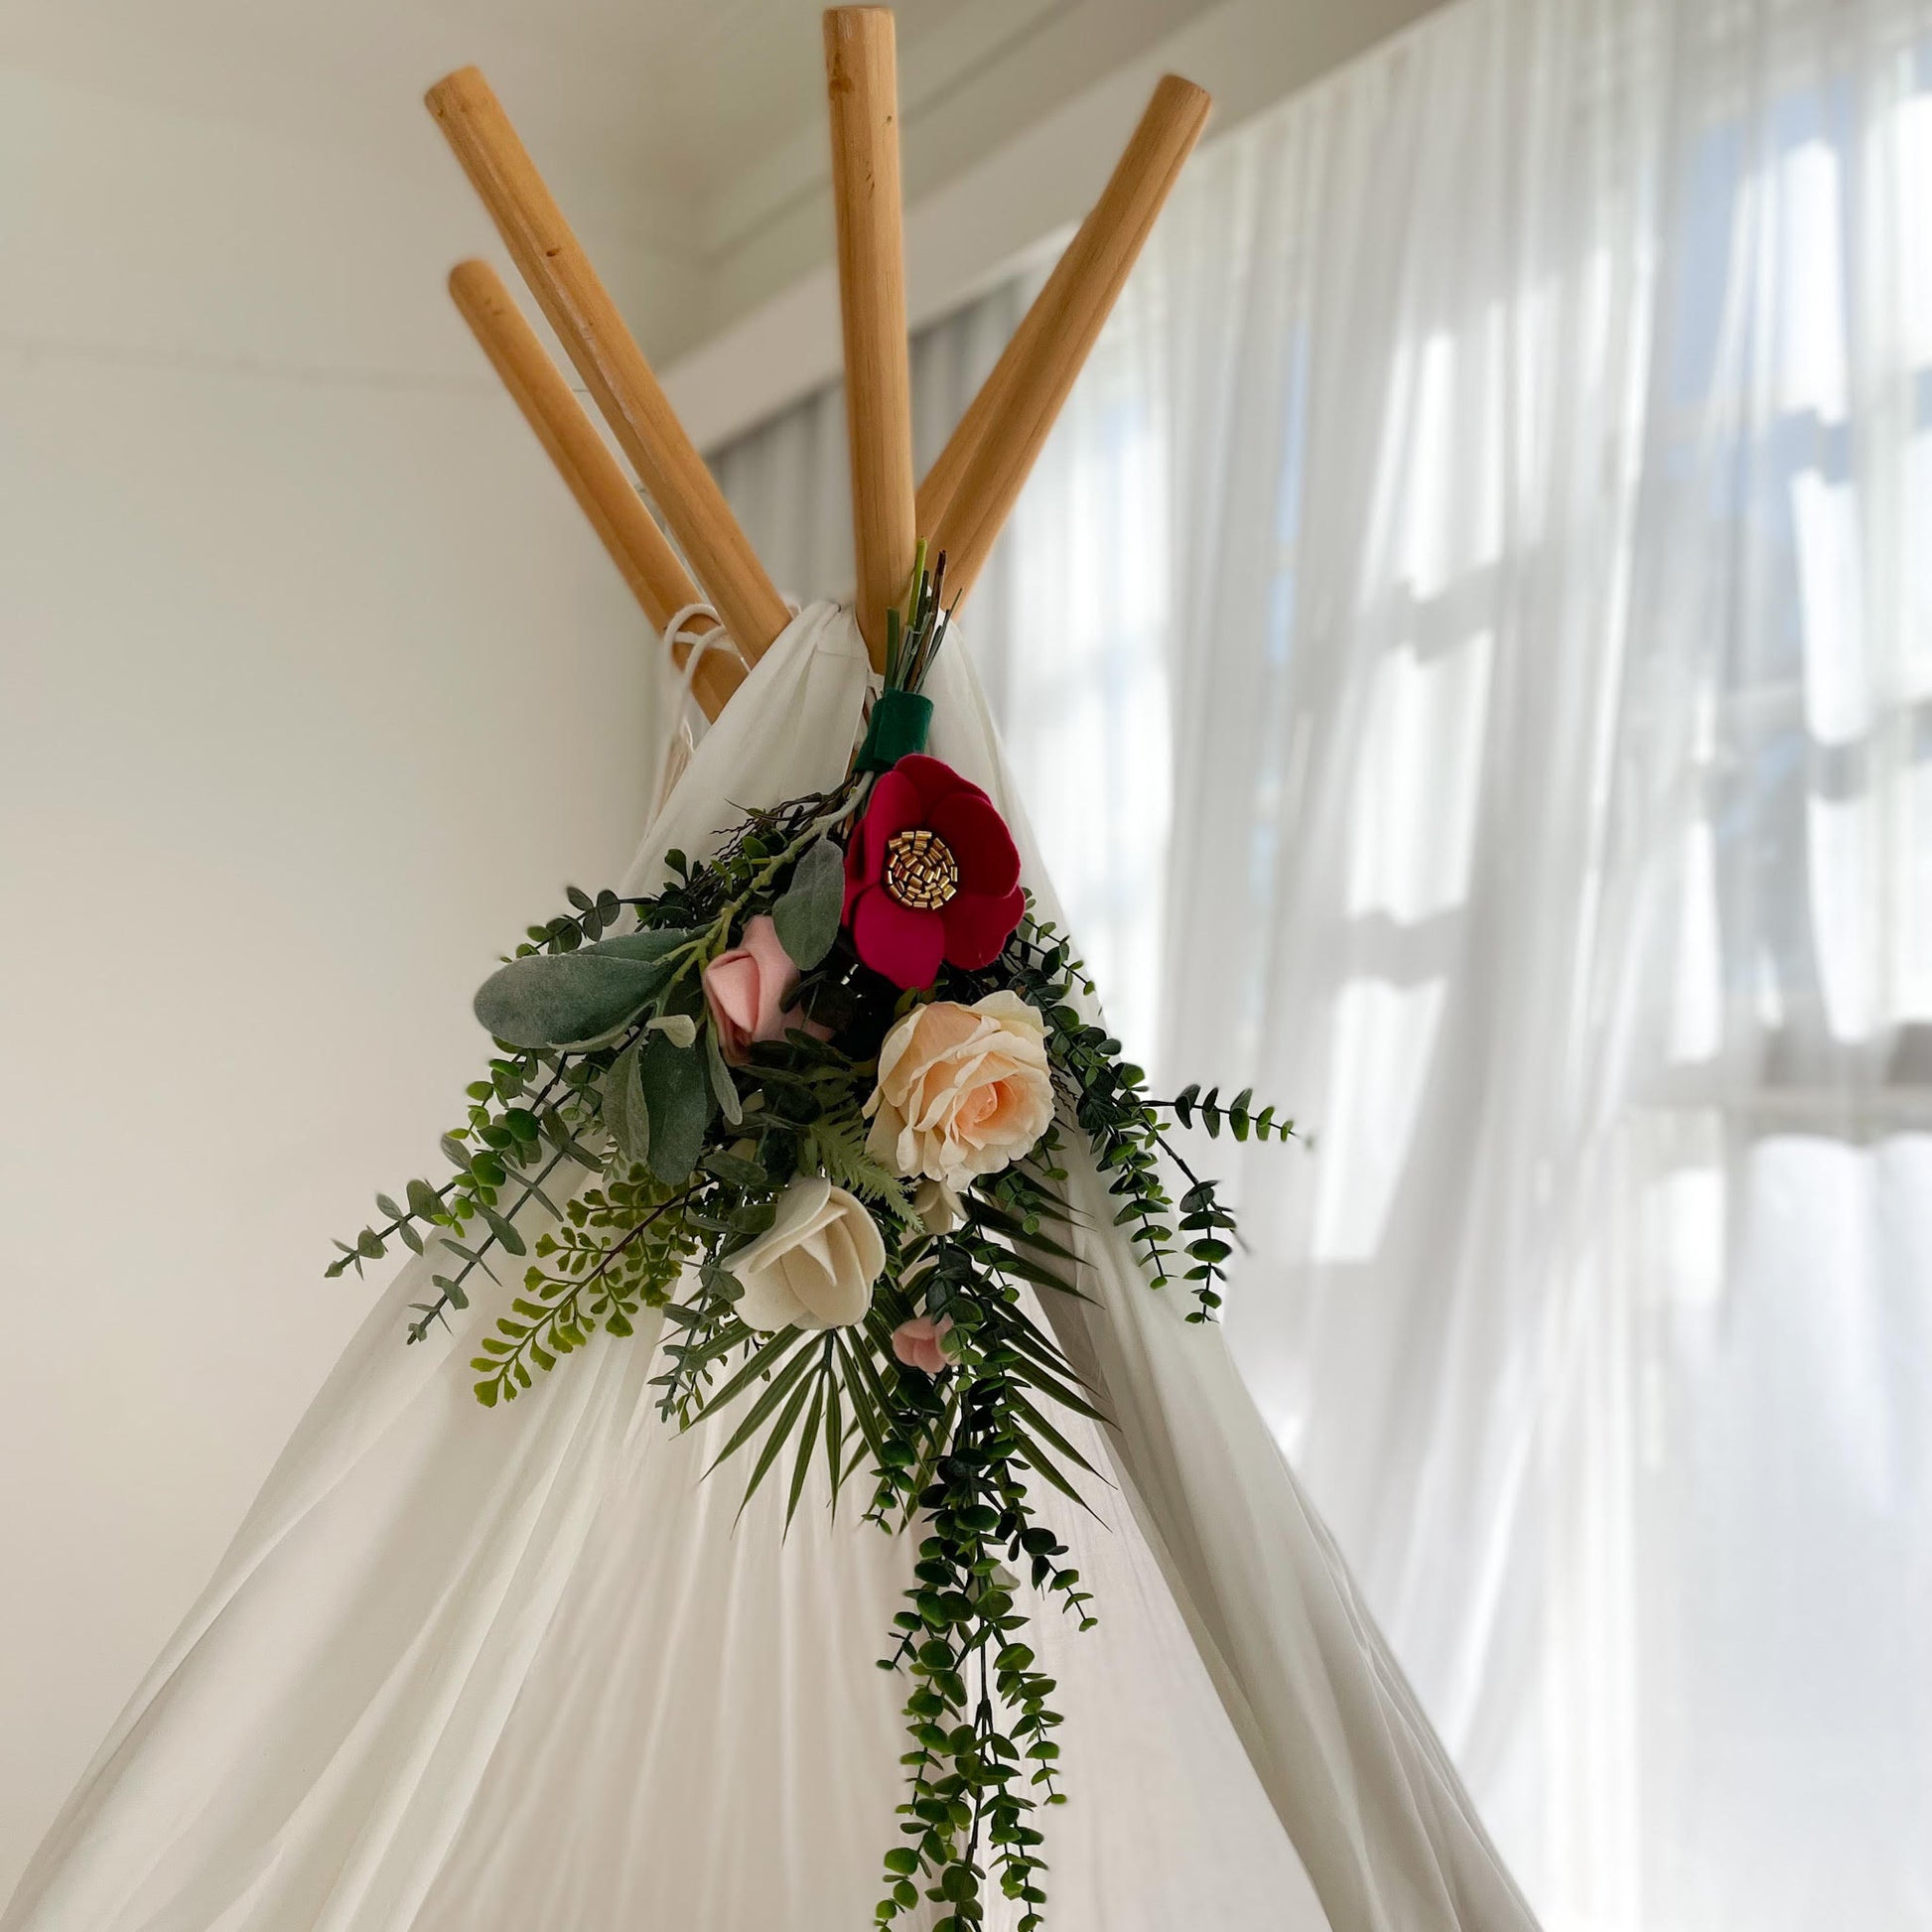 Handmade floral topper on teepee